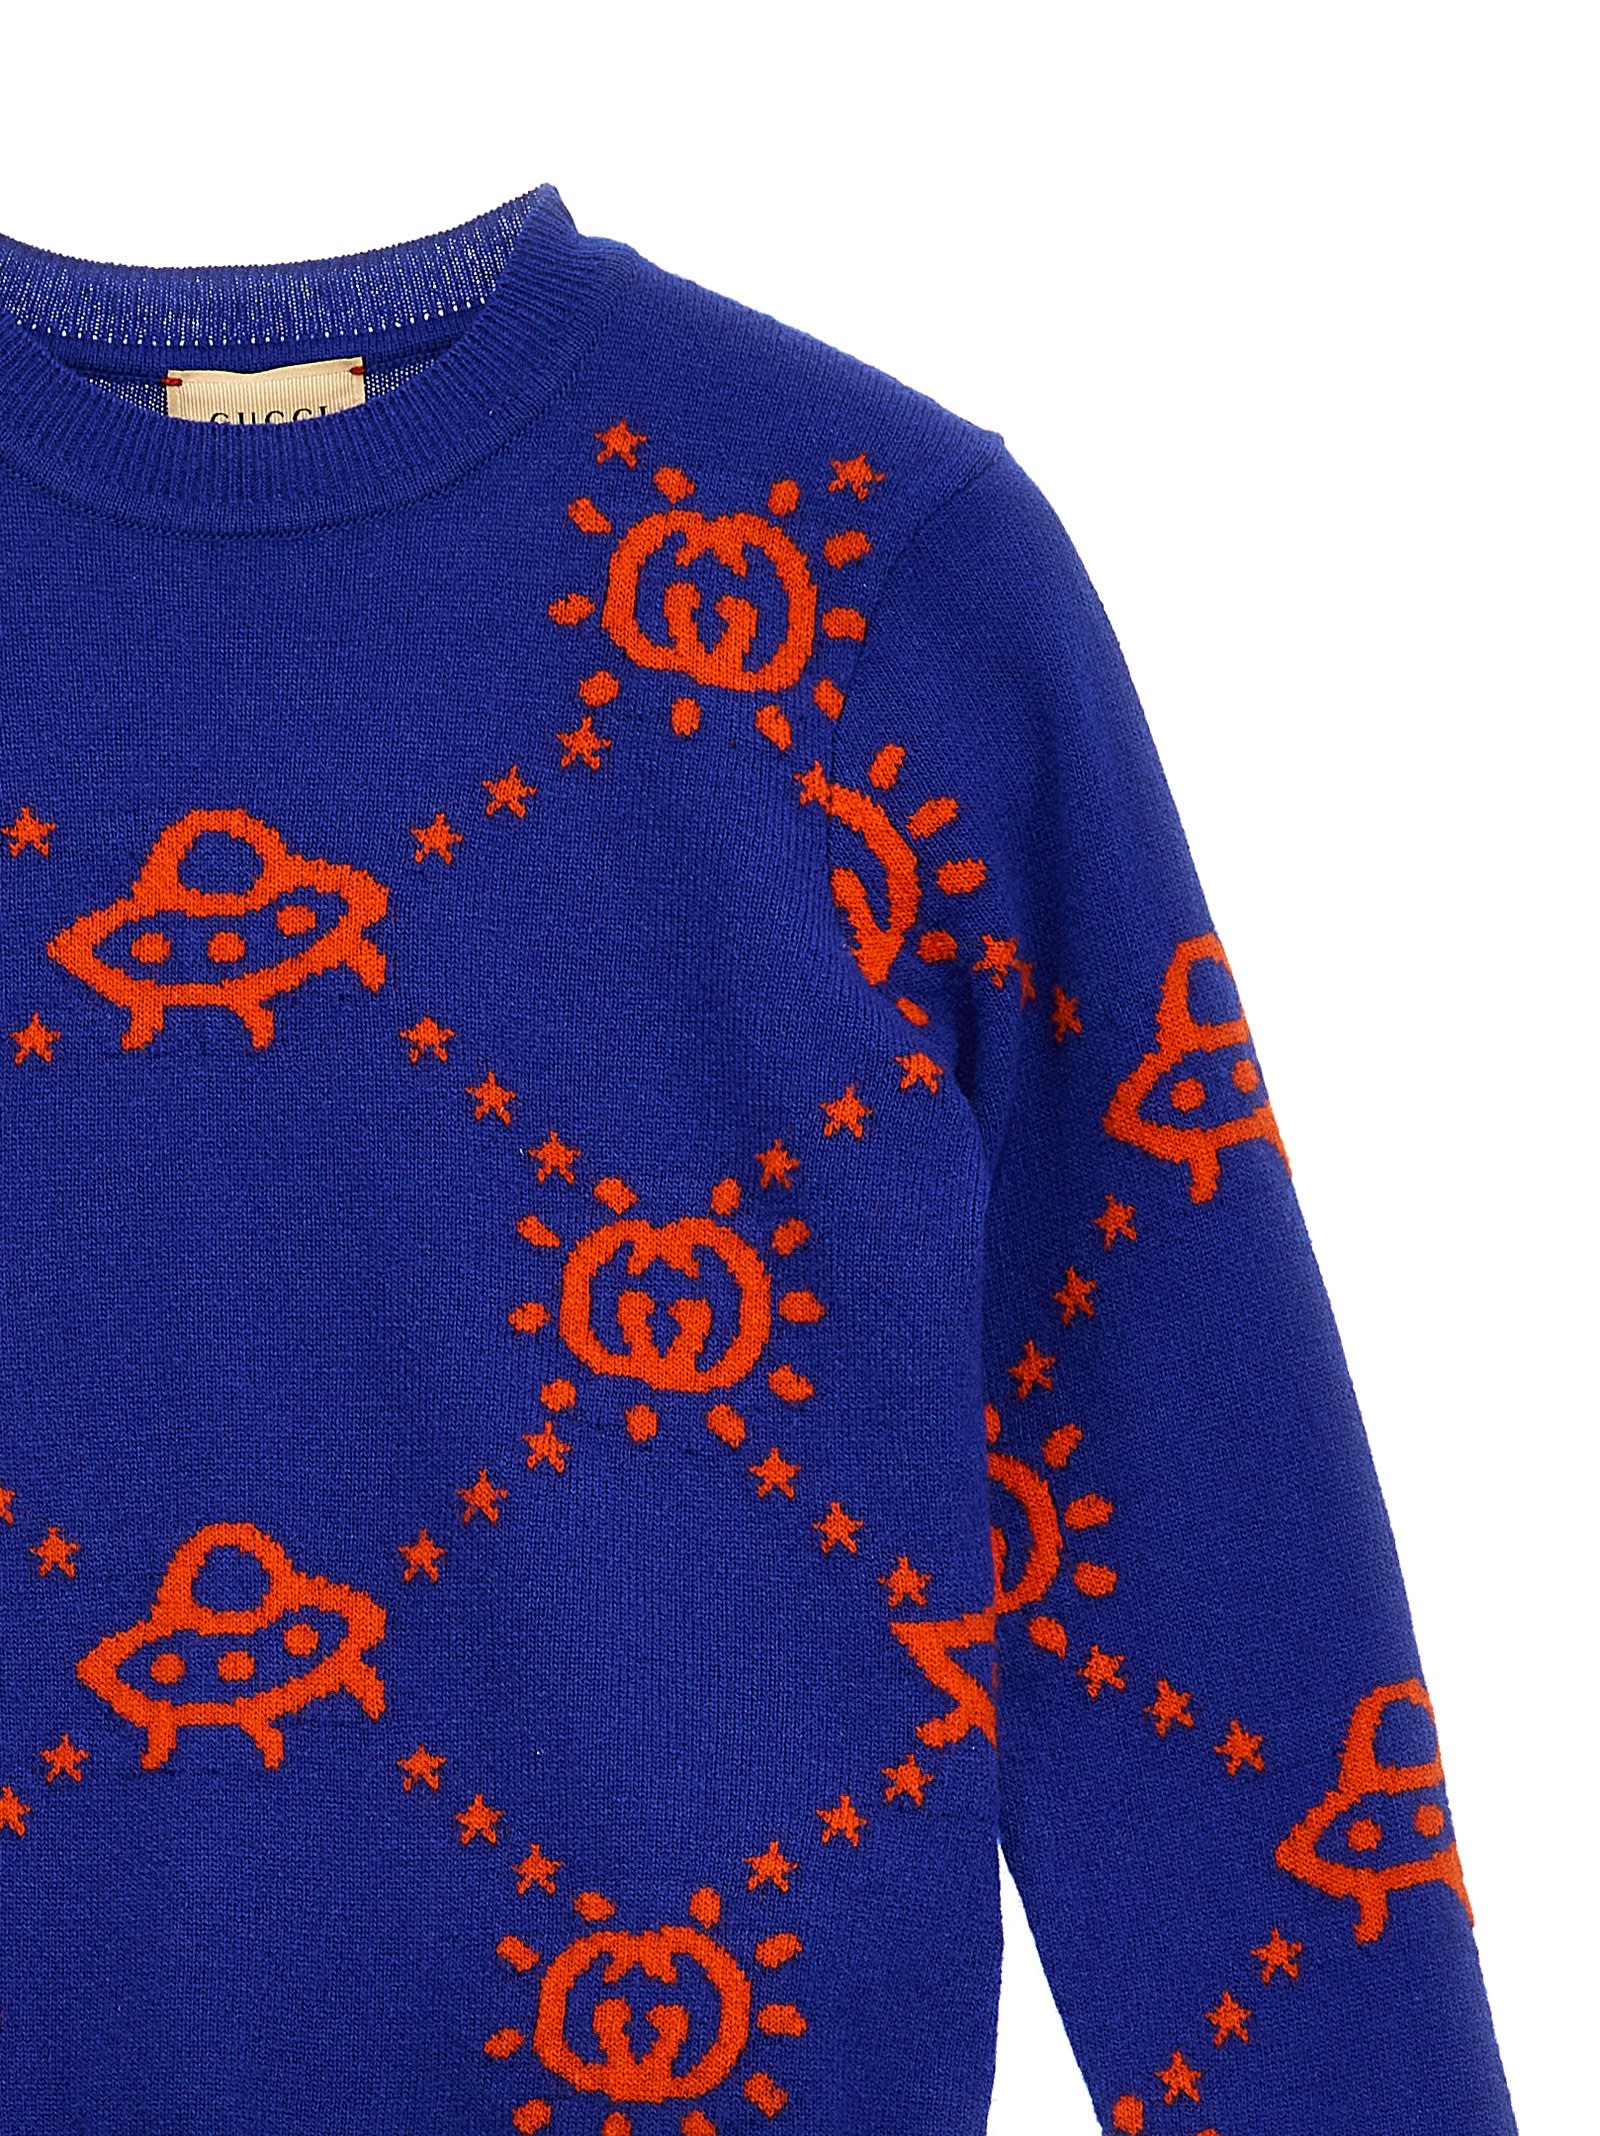 Shop Gucci Ufo Sweater In Navy